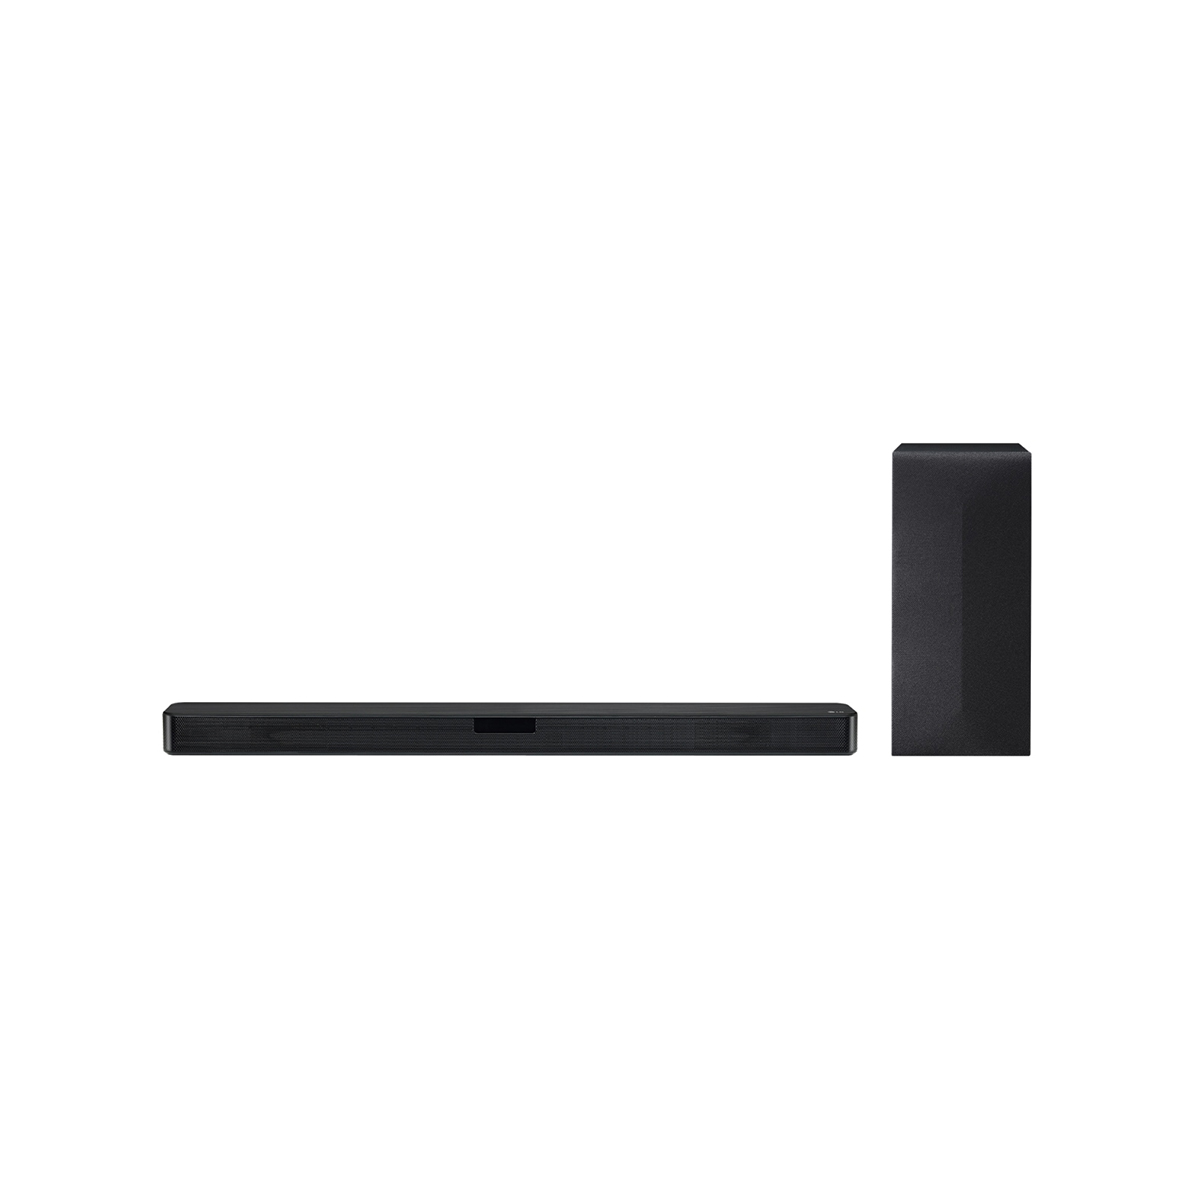 LG LG 2.0ch Sound Bar with Bluetooth Connectivity SK1D